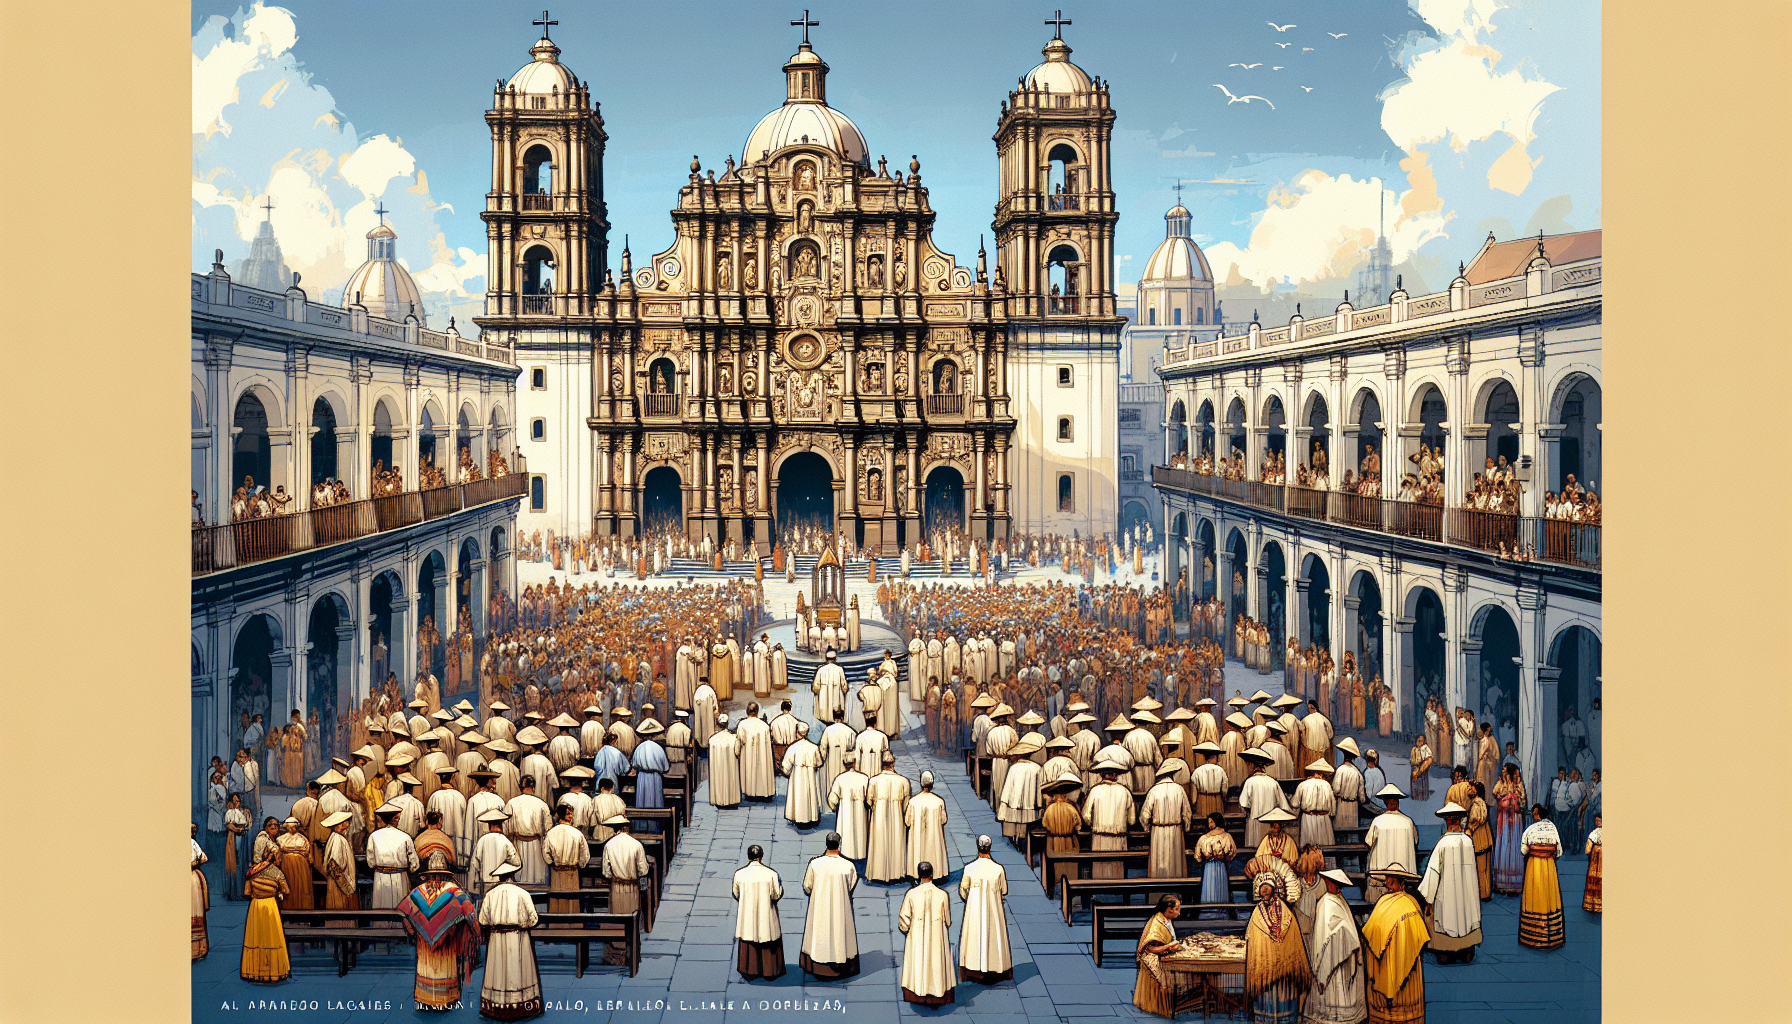 Create an image of a grand cathedral in the heart of Nueva España, bustling with activity as churchgoers gather for a religious service. The architecture should reflect the rich colonial style of the